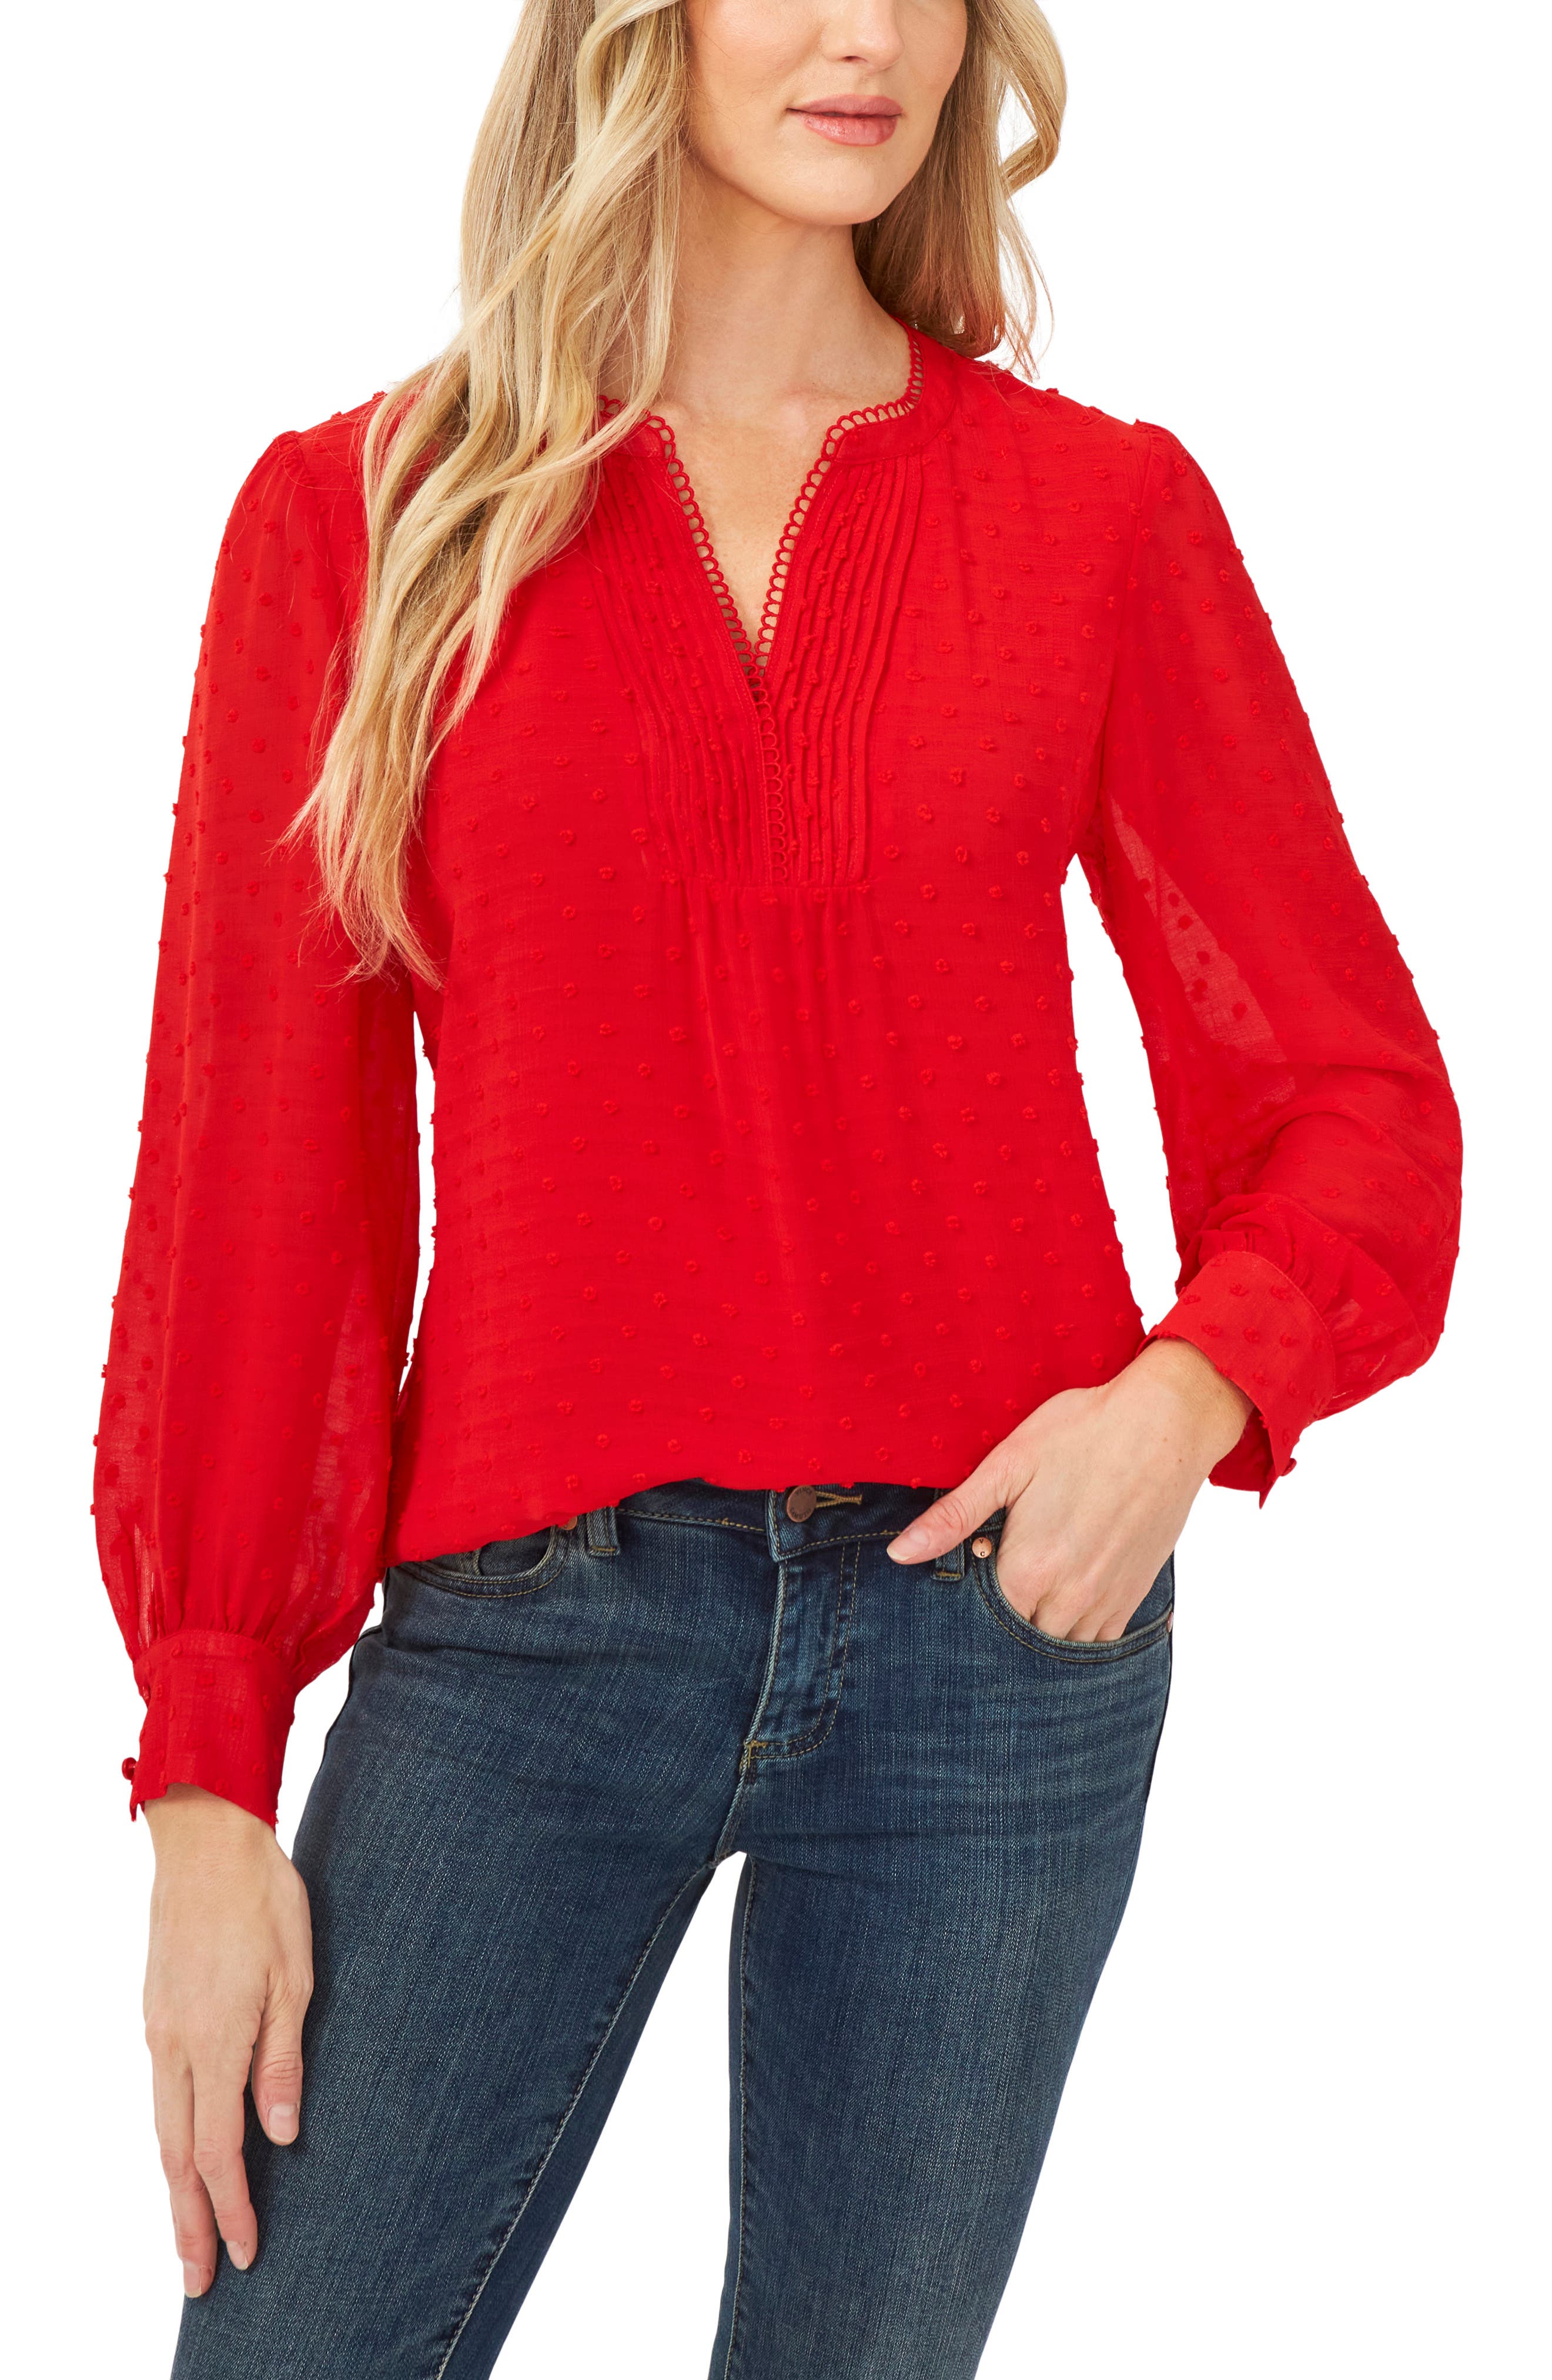 red tops for ladies